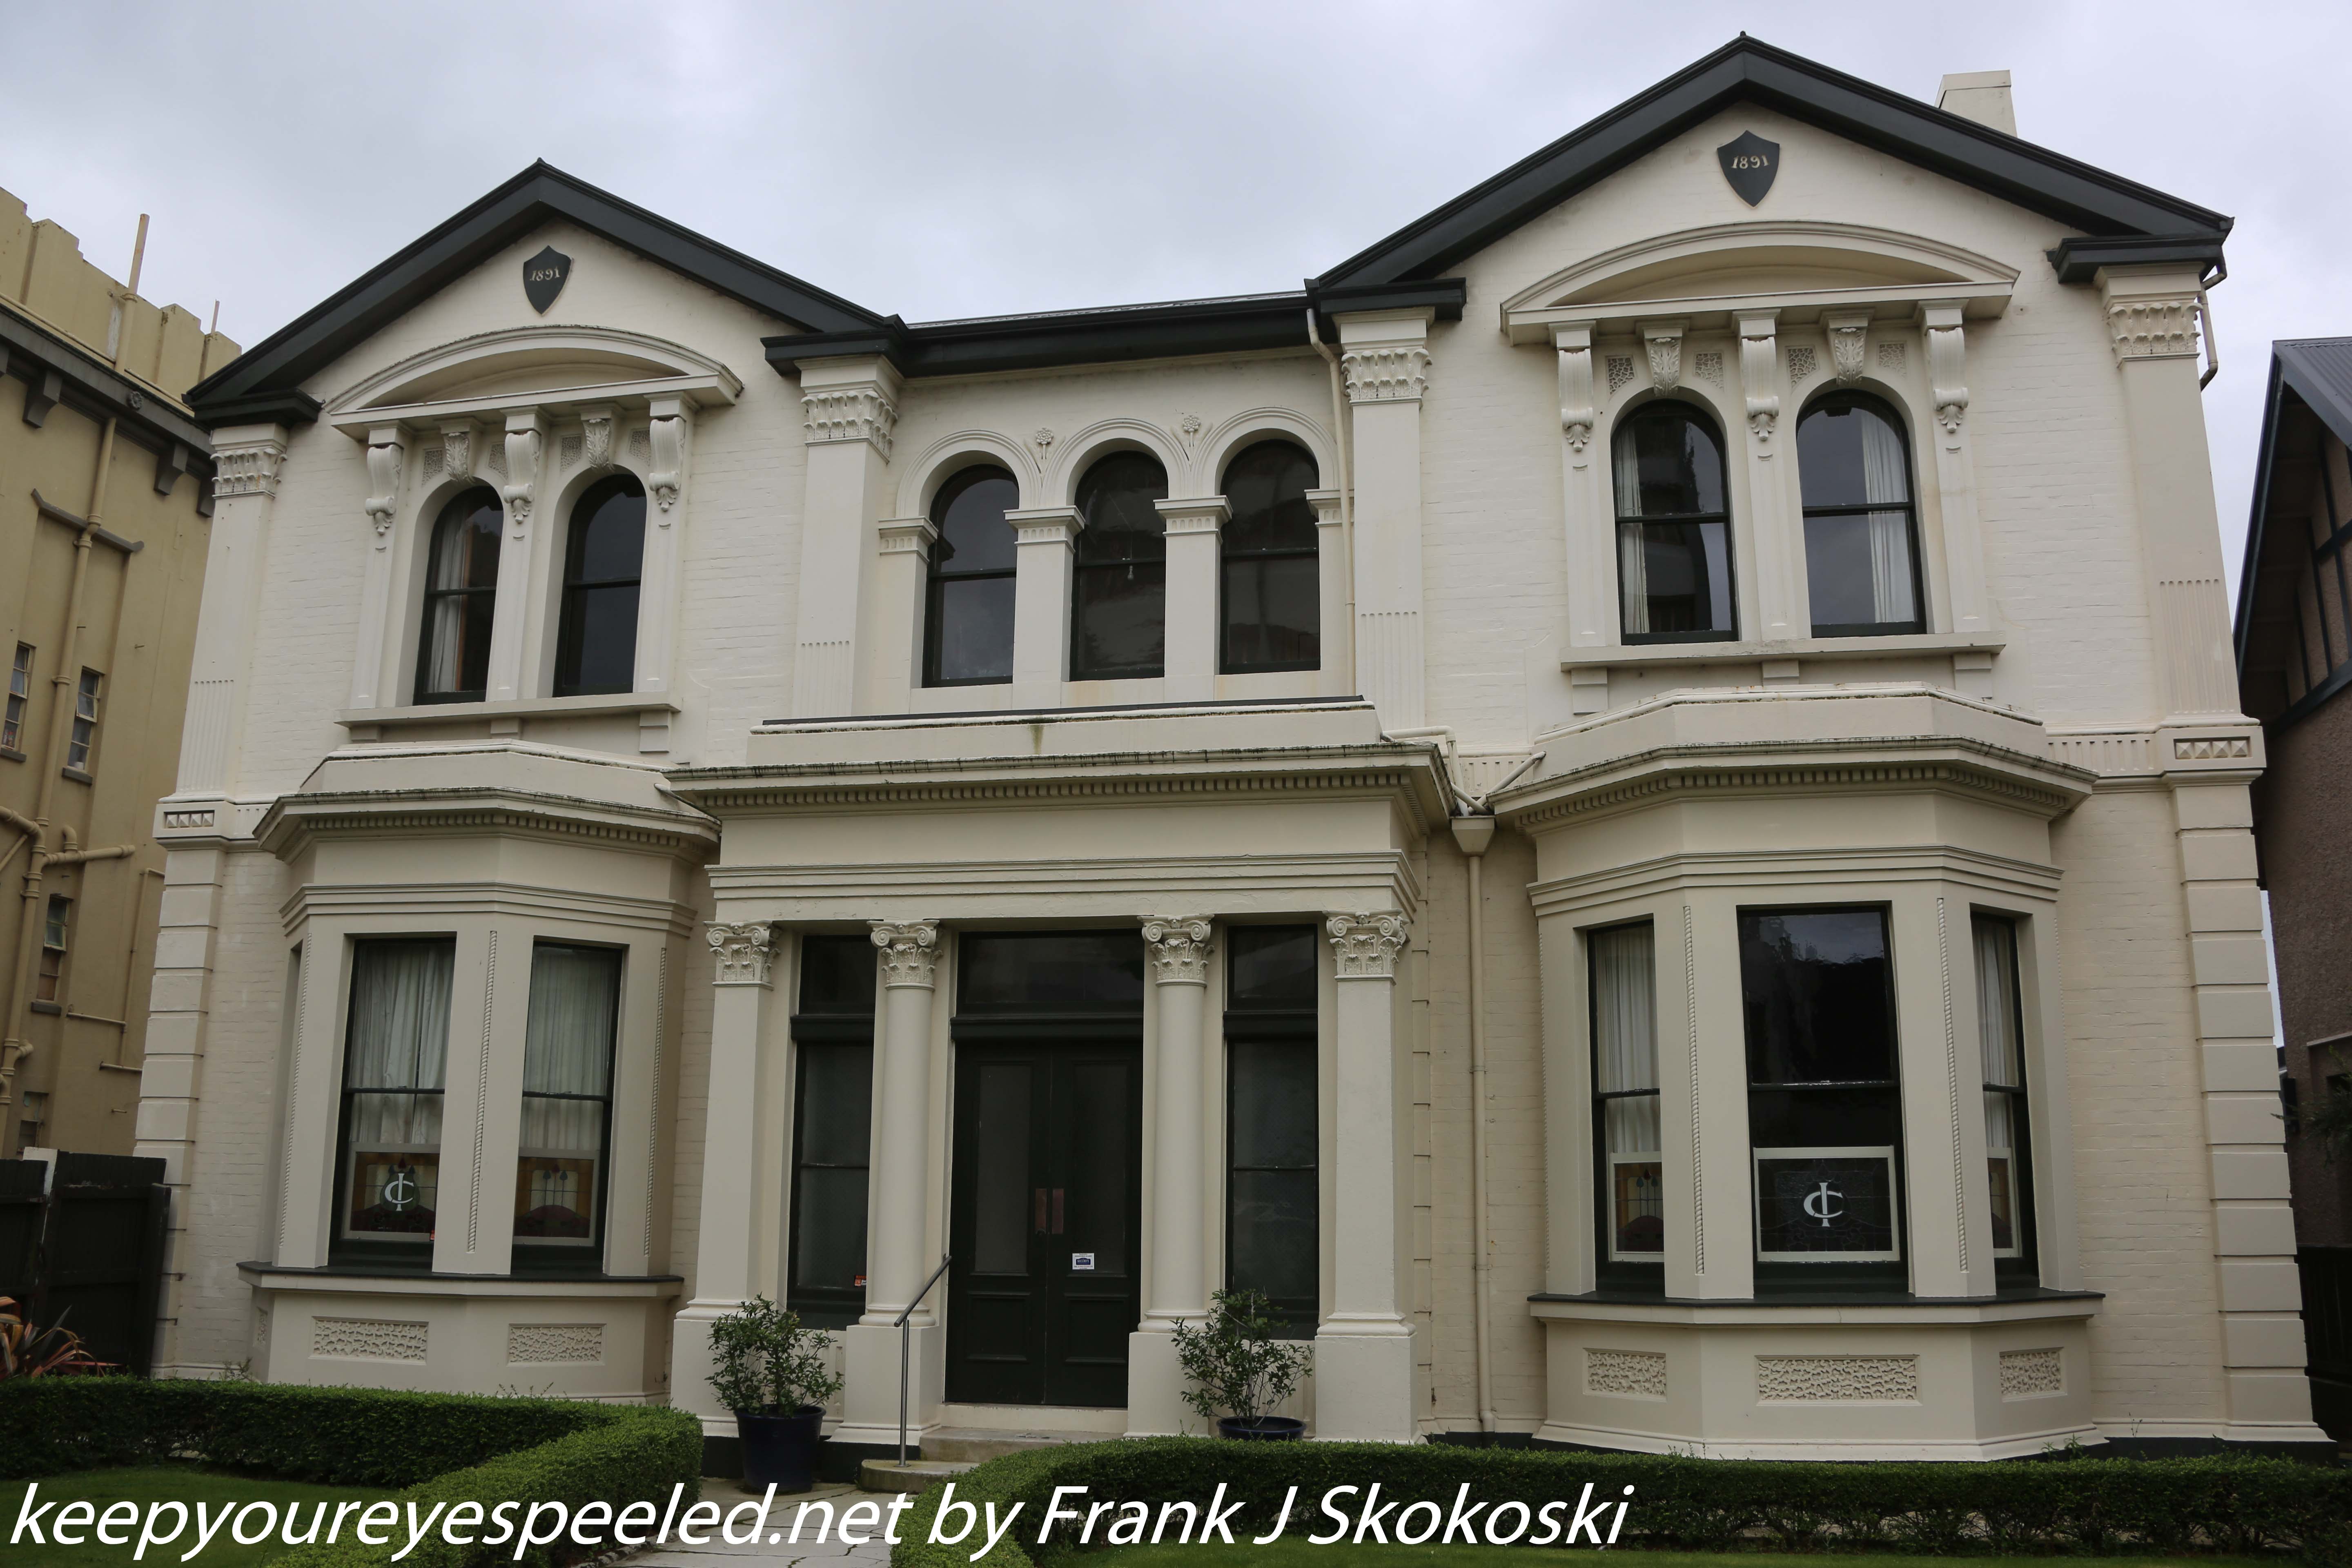 New-Zealand-Day-Eleven-Invercargill-6-of-50